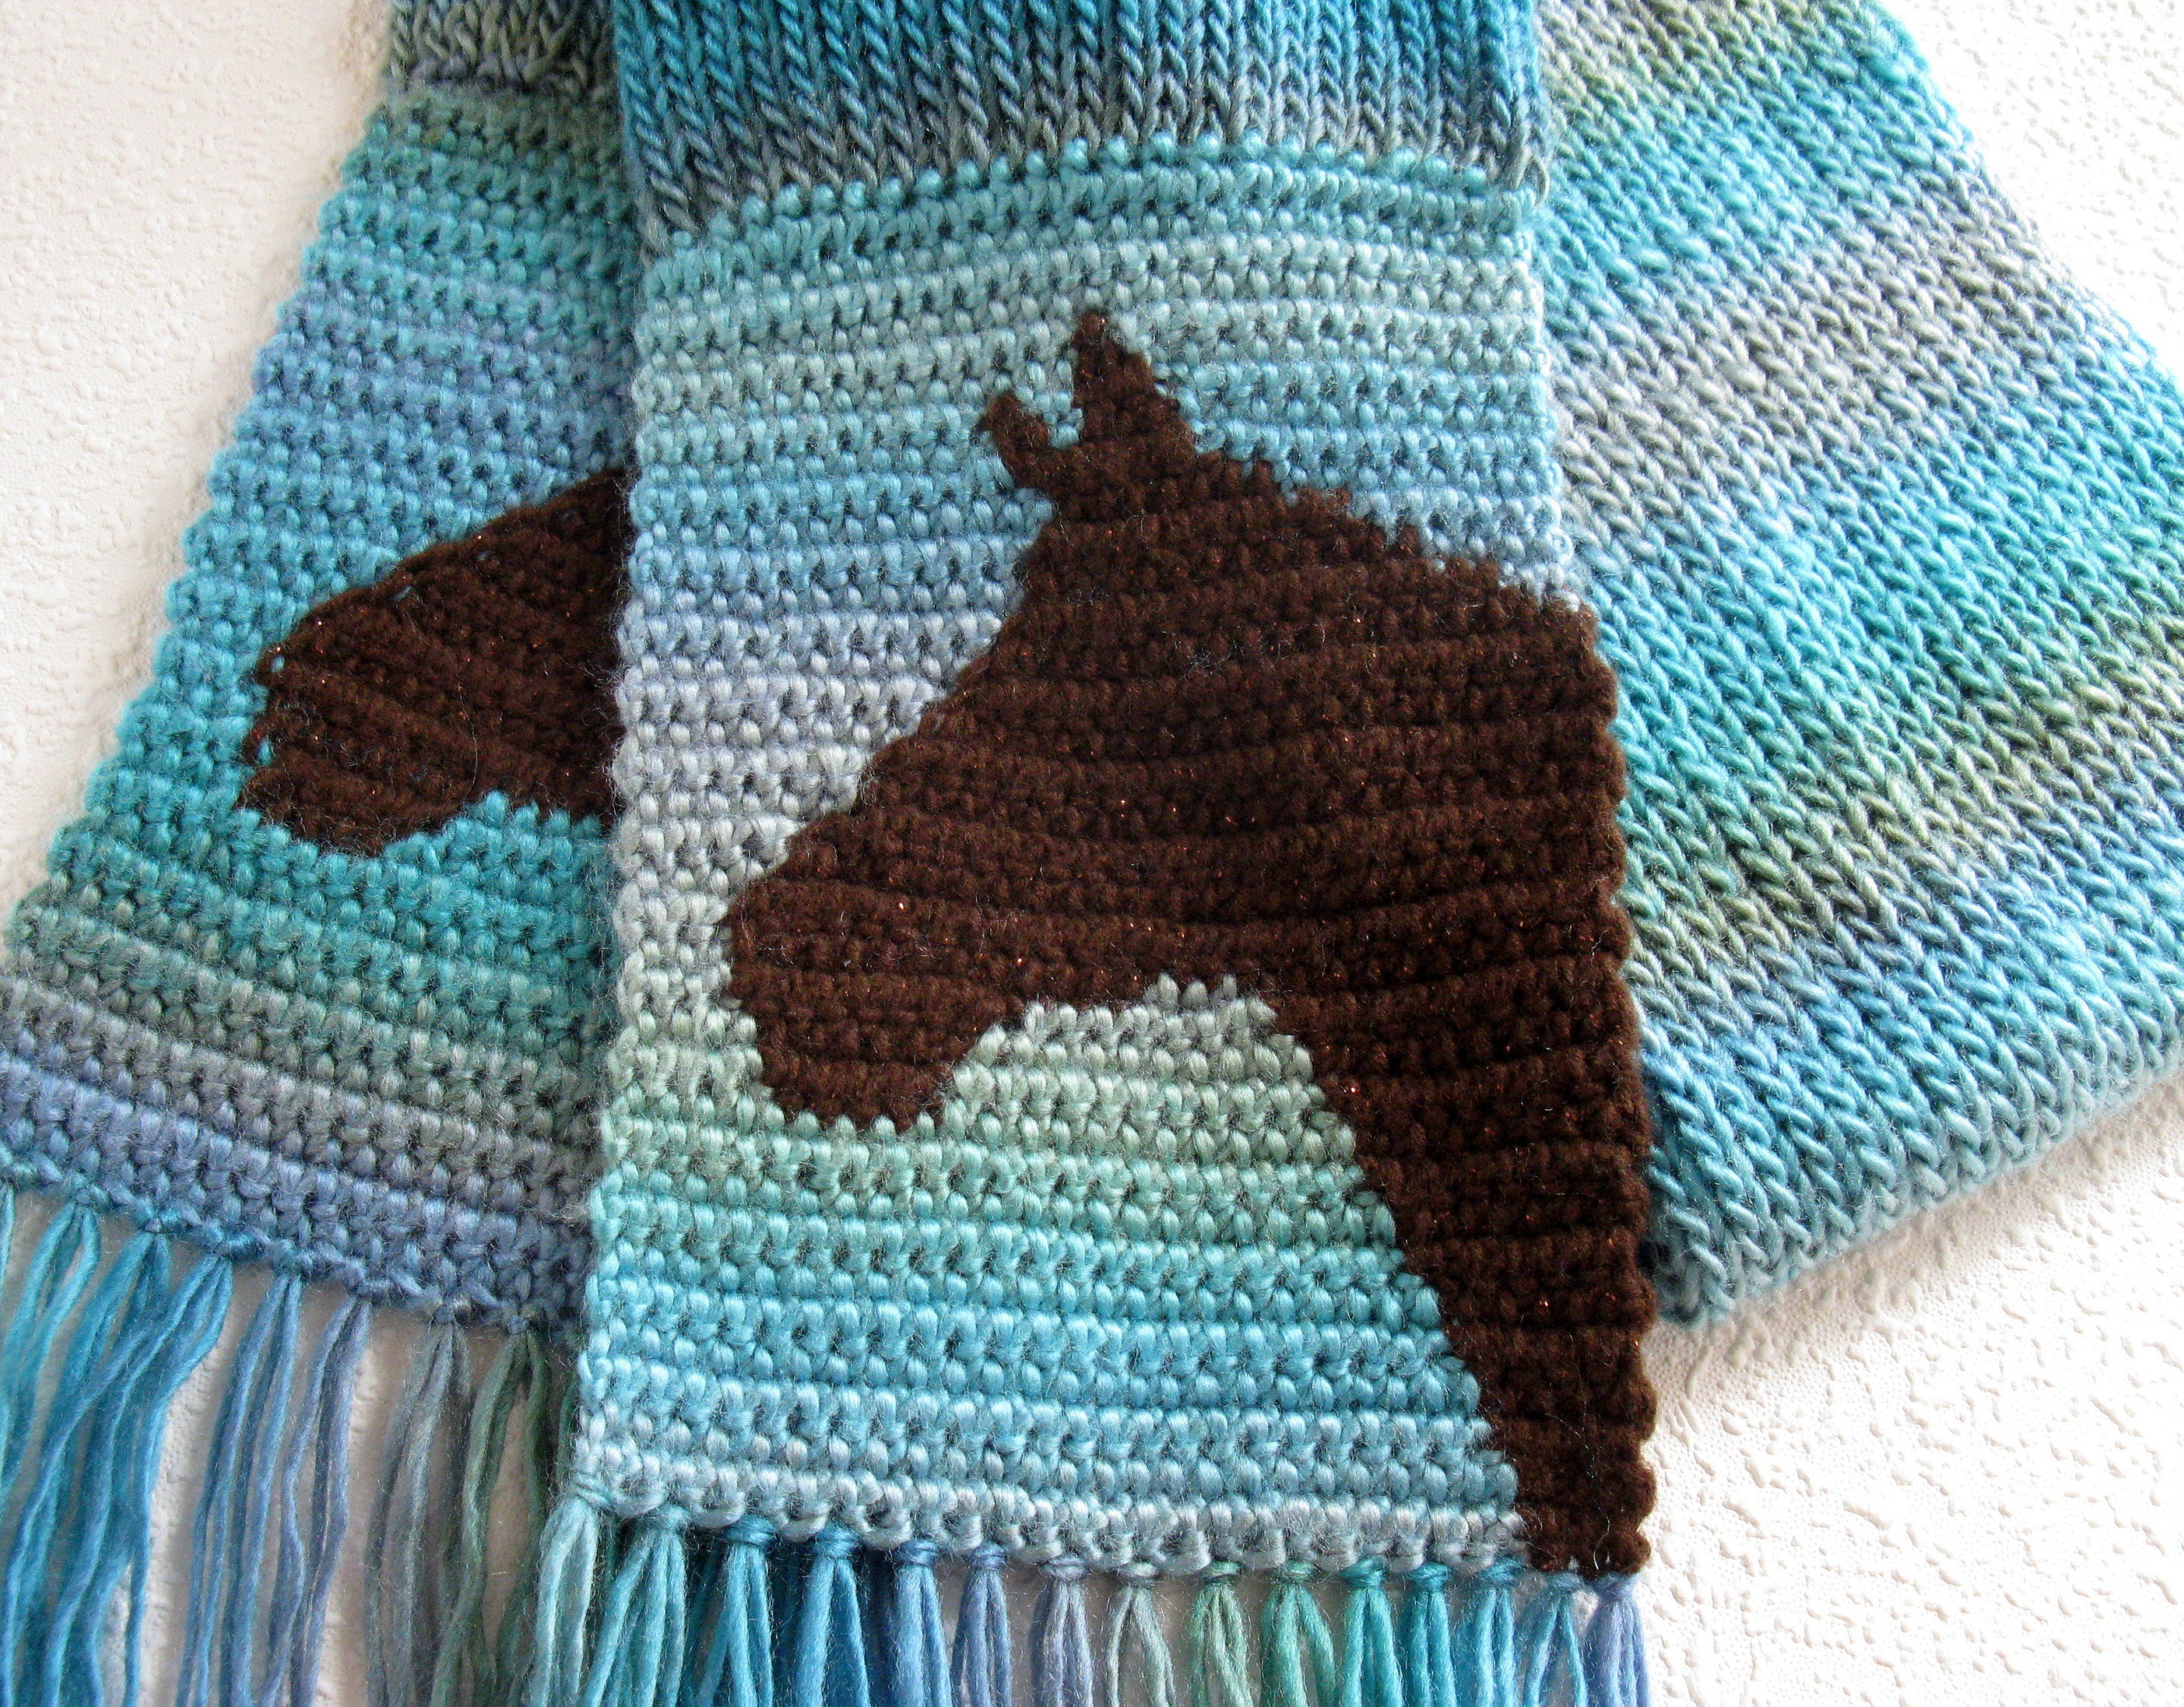 Knitted Horse Scarf. Aqua blue knit and crochet scarf with